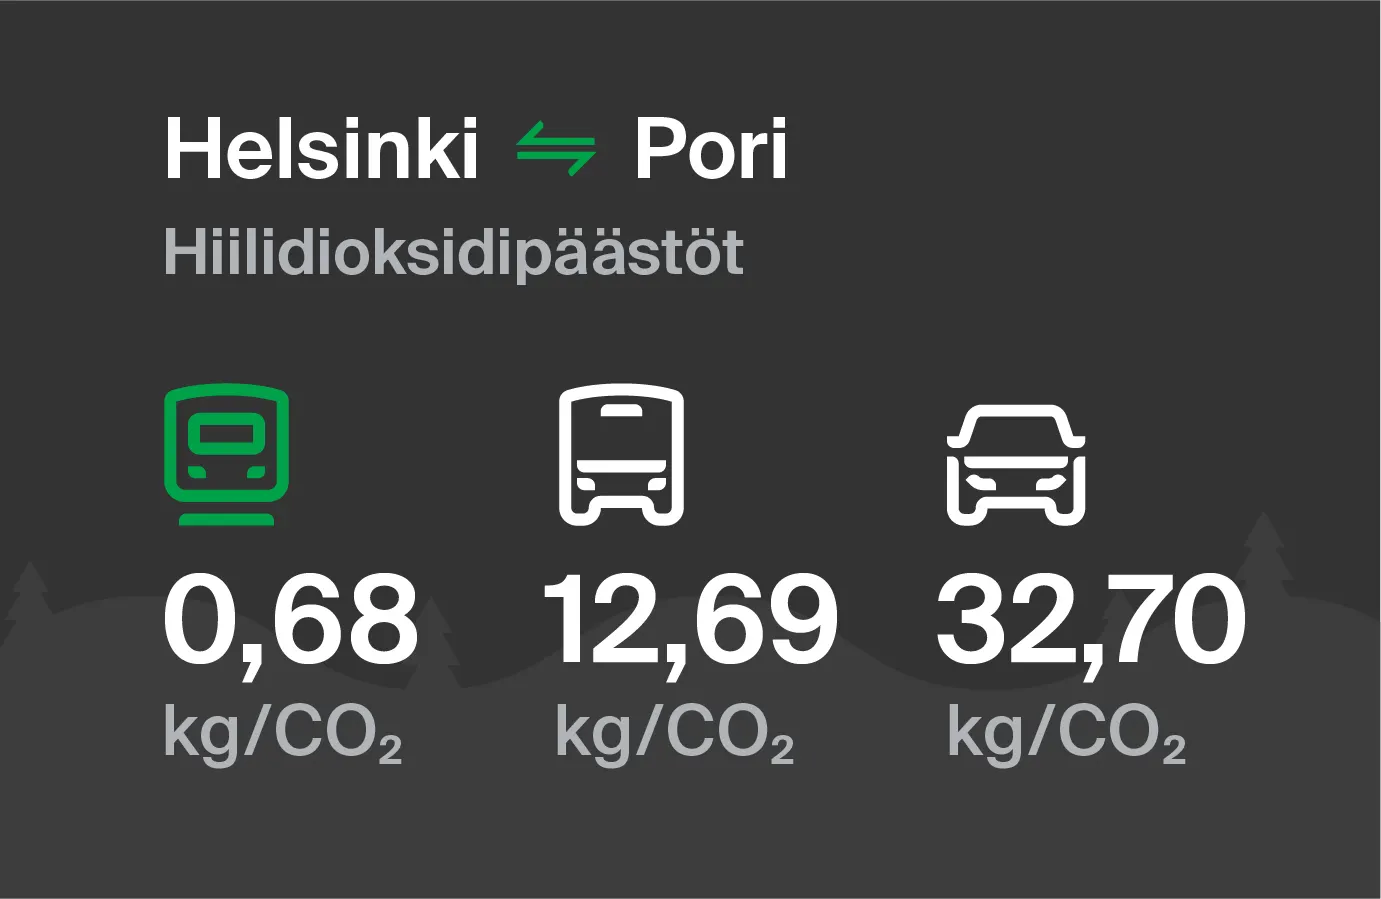 Carbon dioxide emissions from Helsinki to Pori by different modes of transport: by train 0.68 kg/CO2, by bus 12.69 kg/CO2 and by car 32.70 kg/CO2.